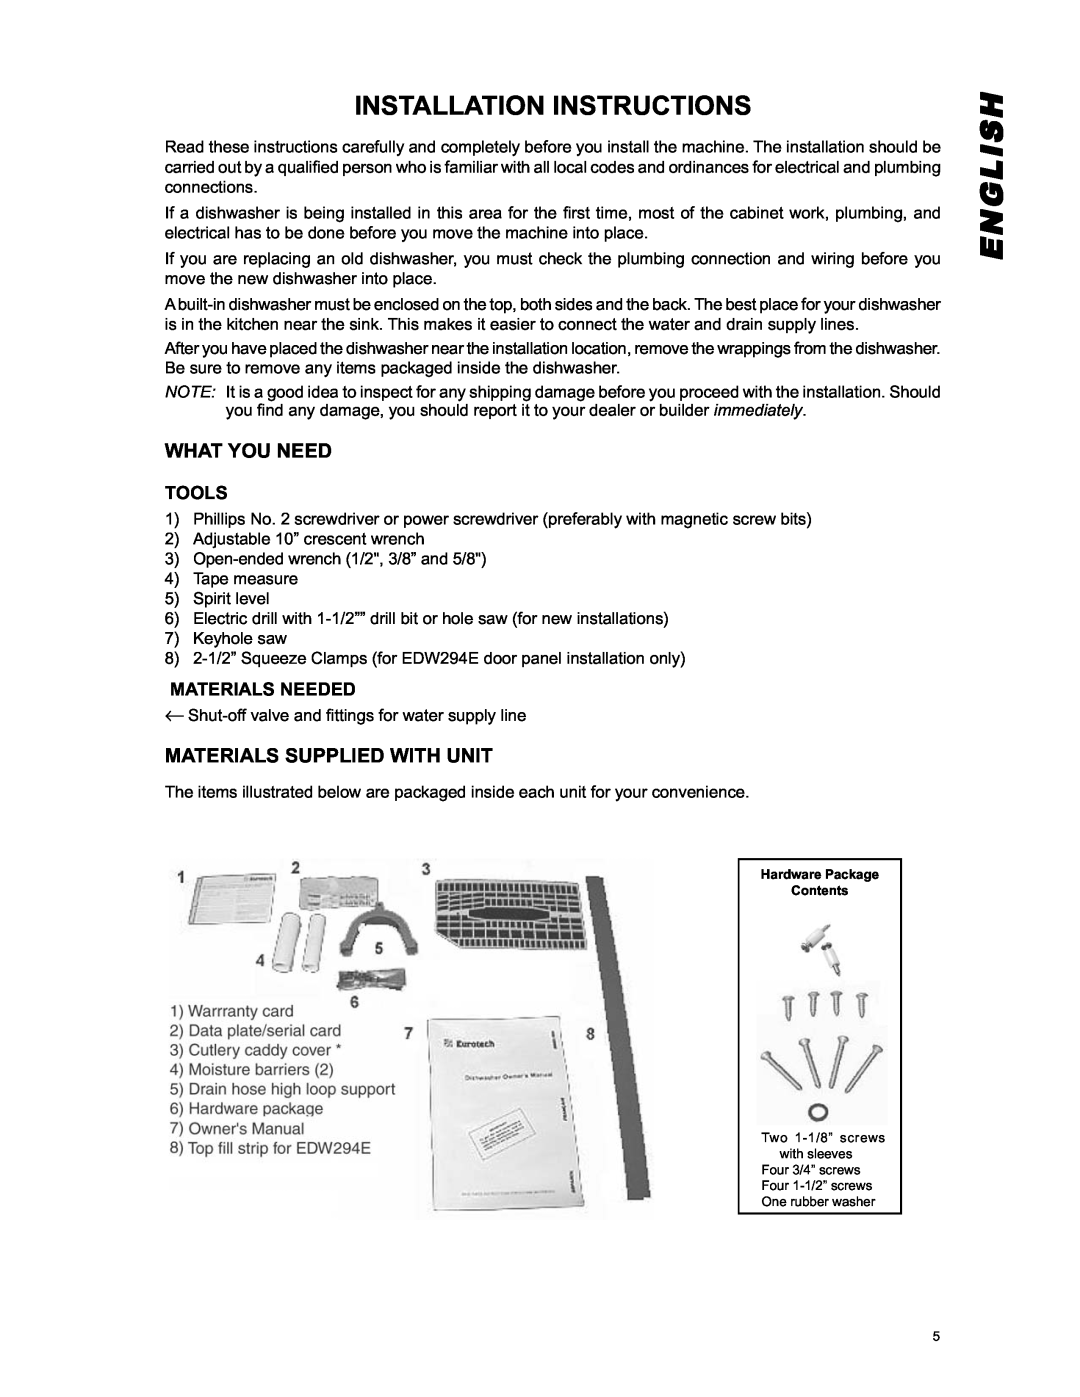 Eurotech Appliances EDW242C Installation Instructions, English, What You Need, Materials Supplied With Unit, Tools 